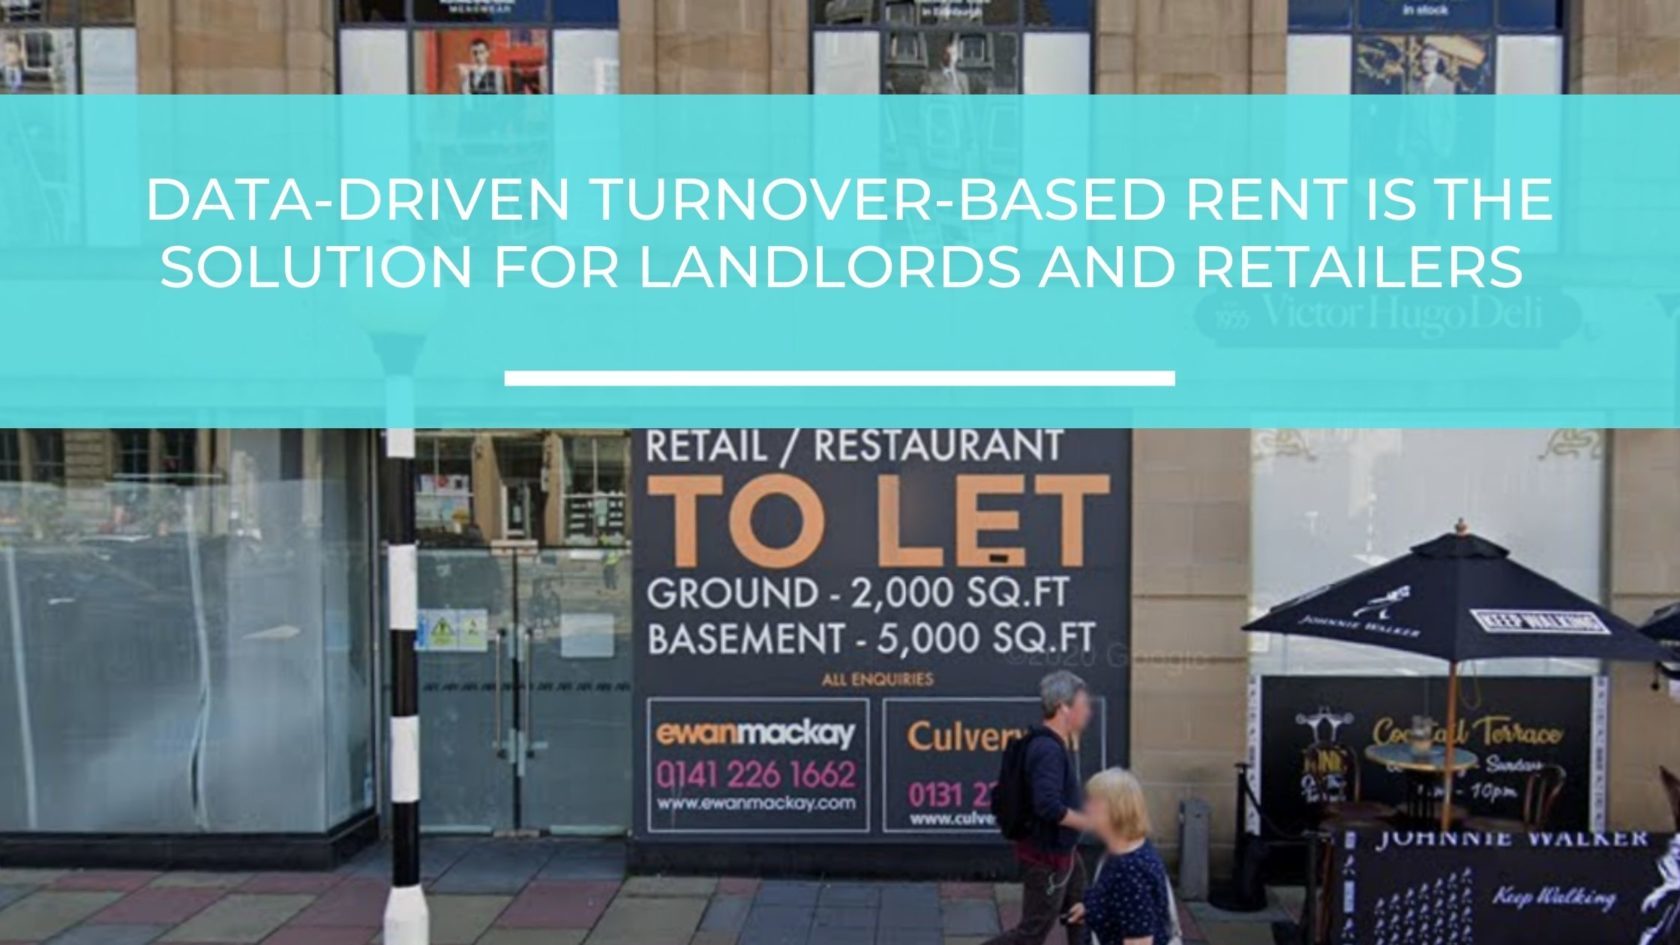 Data-driven turnover-based rent is the solution for landlords and retailers